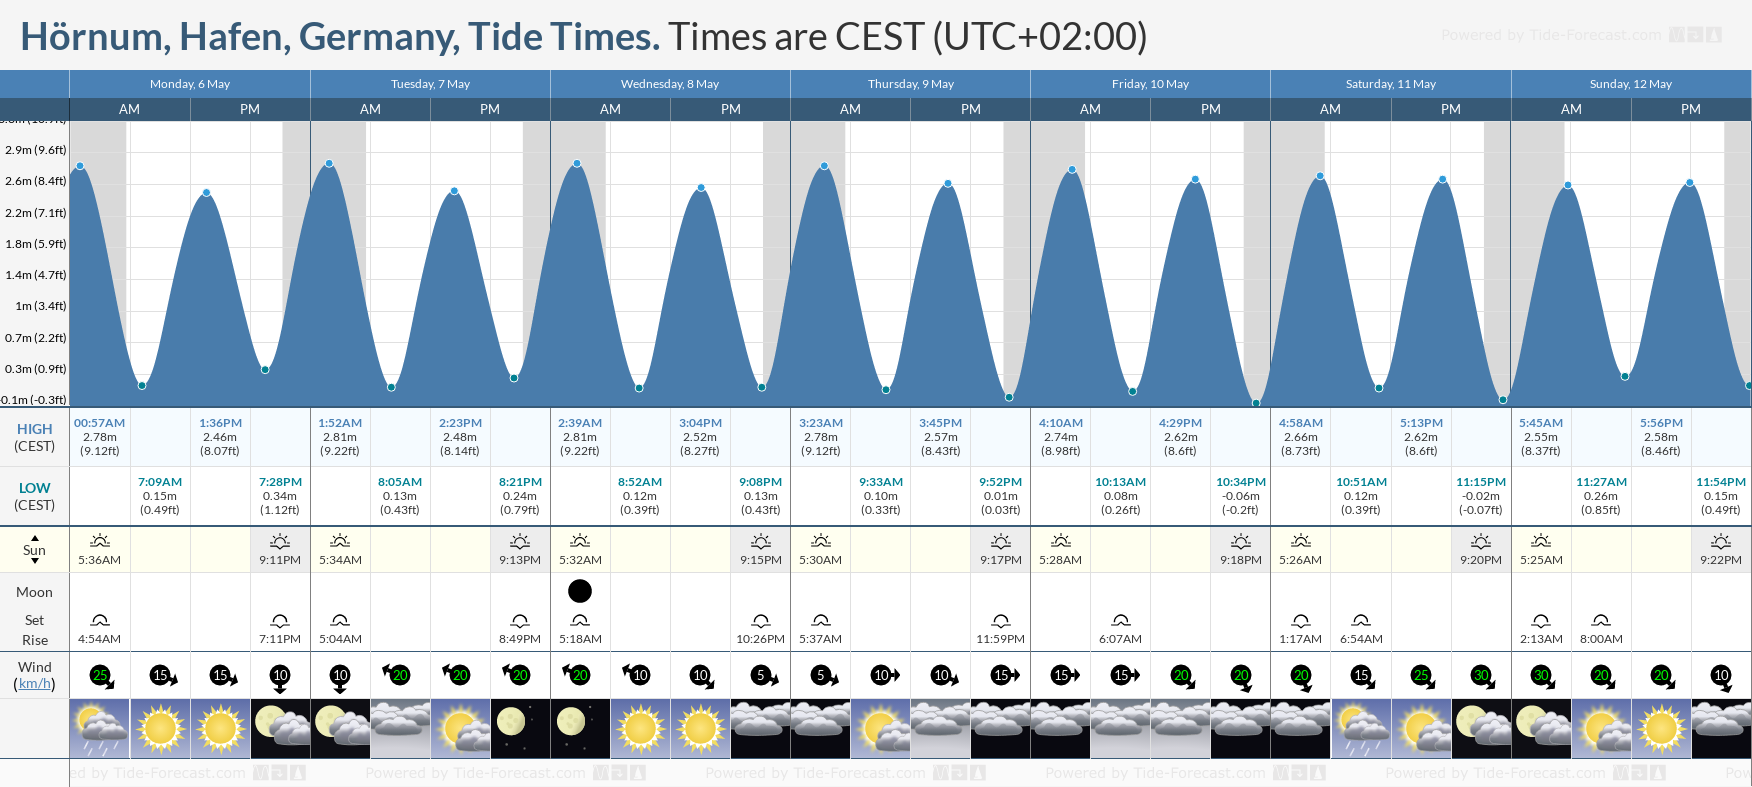 Hörnum, Hafen, Germany Tide Chart including high and low tide tide times for the next 7 days